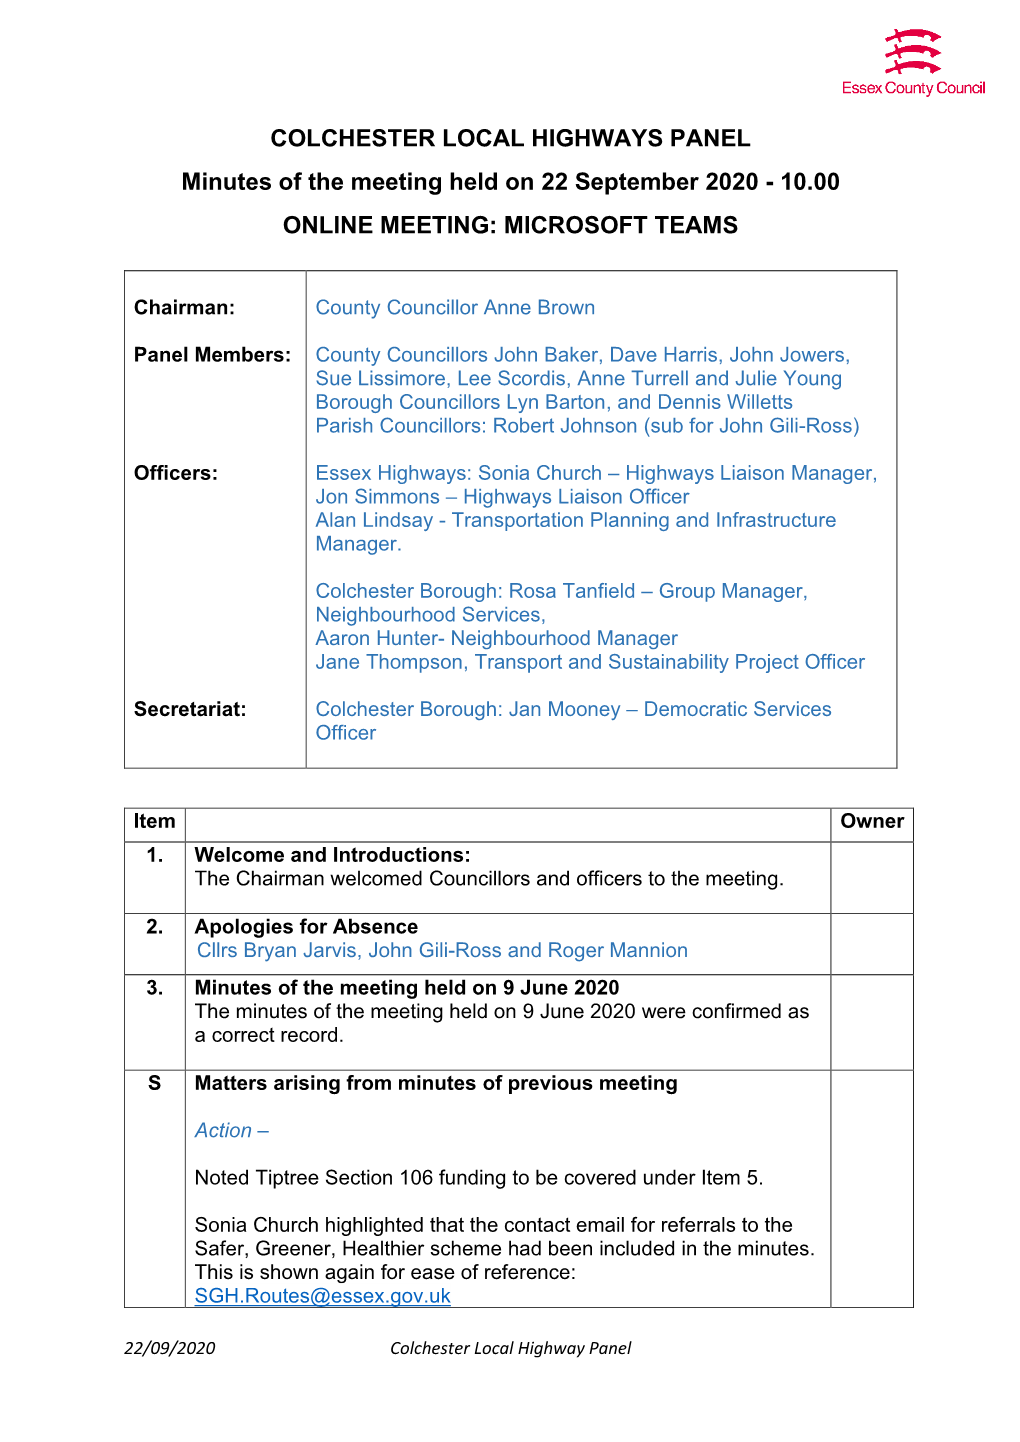 COLCHESTER LOCAL HIGHWAYS PANEL Minutes of the Meeting Held on 22 September 2020 - 10.00 ONLINE MEETING: MICROSOFT TEAMS